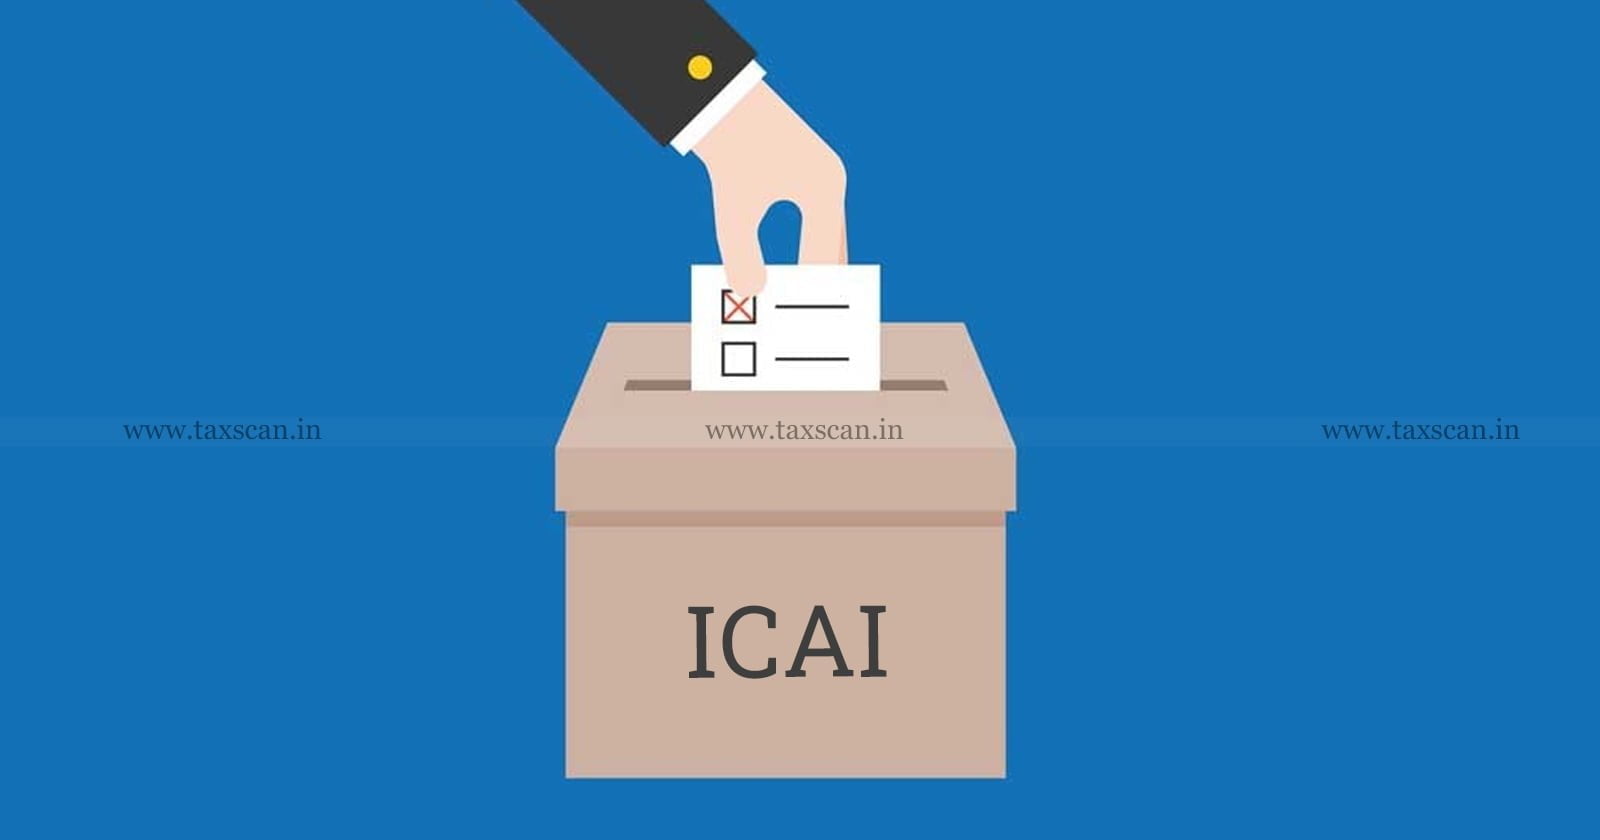 Bombay High Court - Chartered Accountant - Misconduct - Soliciting Votes - ICAI Election - ICAI - Election - CA - Taxscan